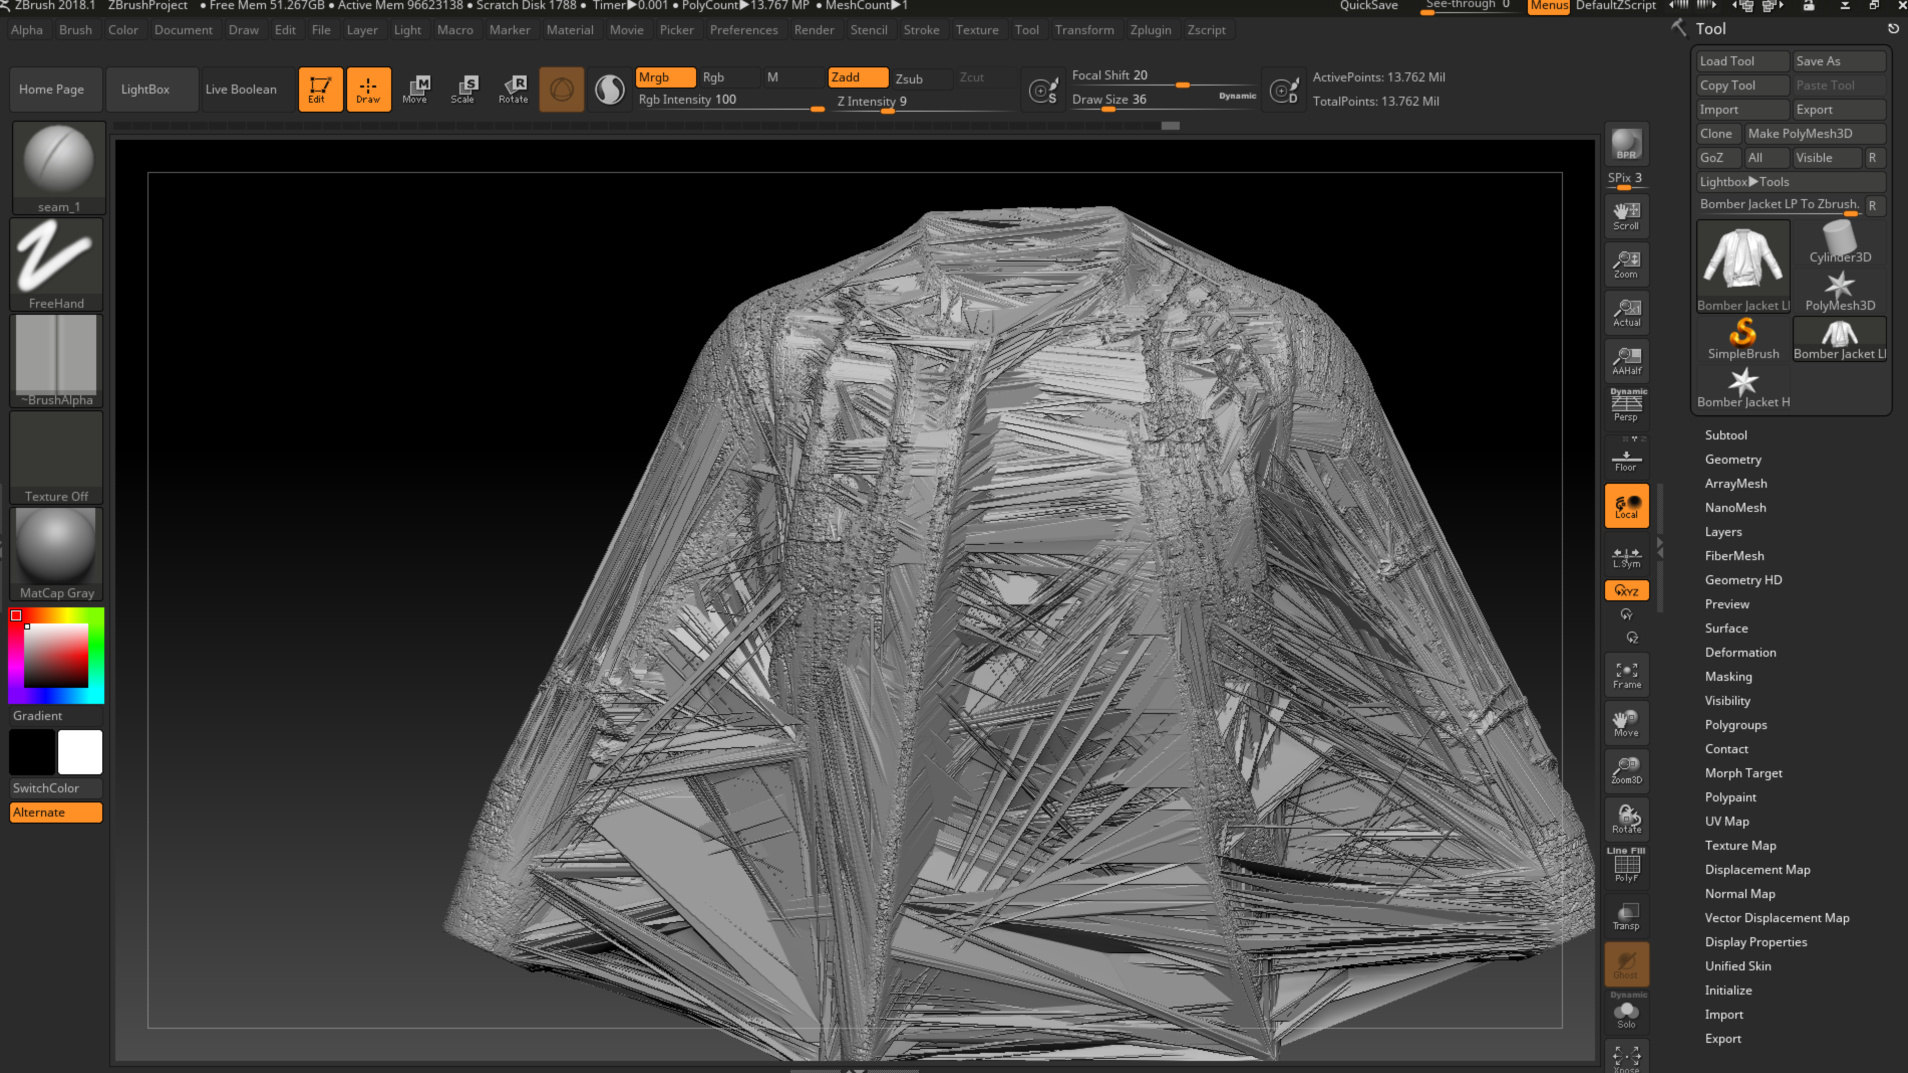 zbrush 2018 goz unable to open file